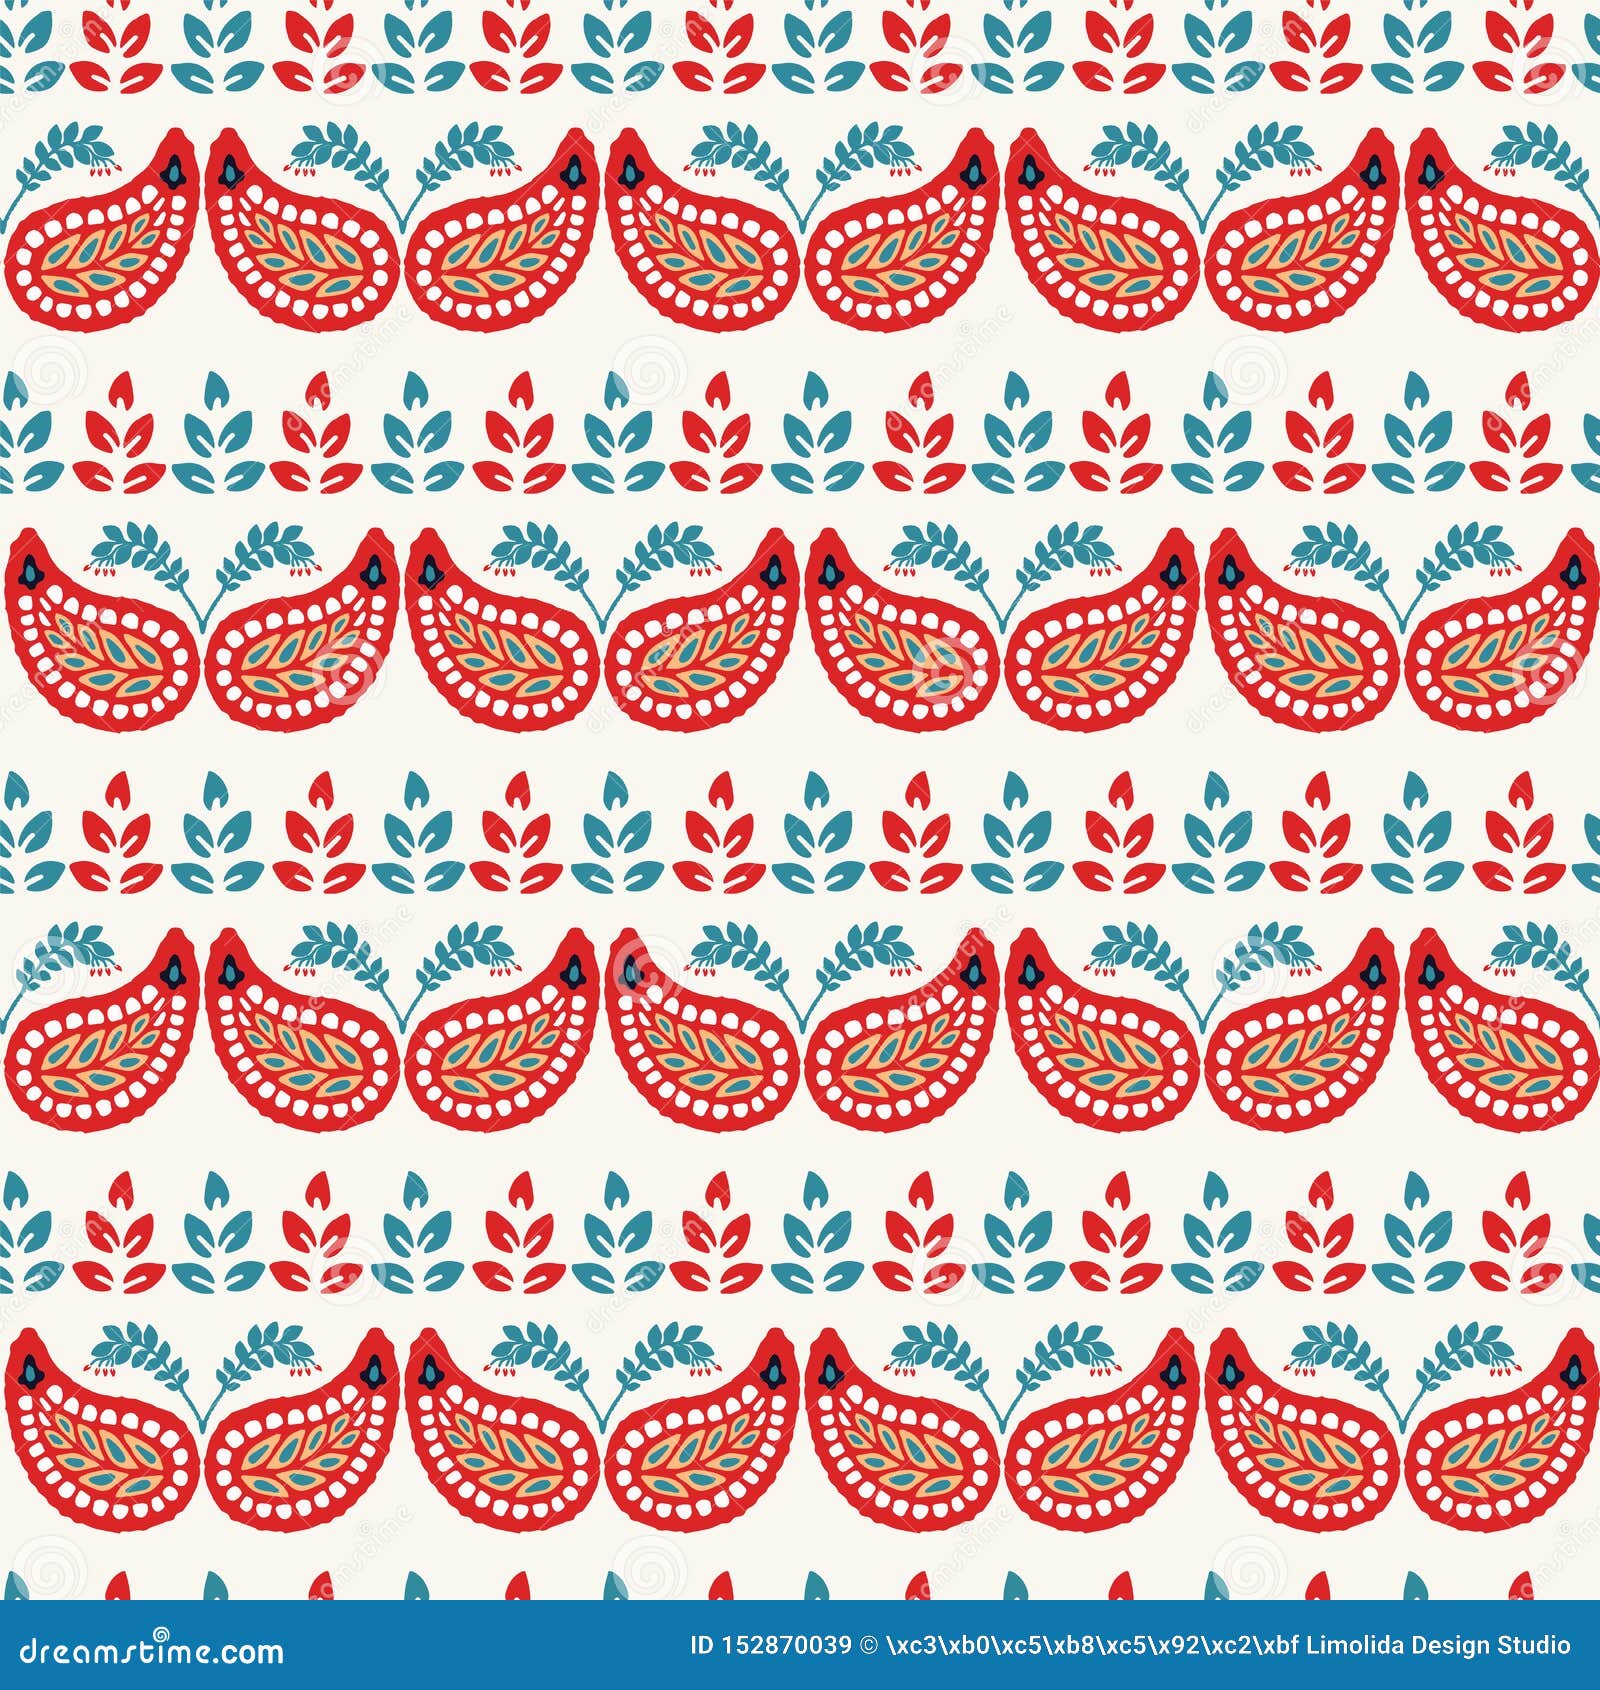 Boho Flower Paisley All Over Print. Seamless Vector Repeating